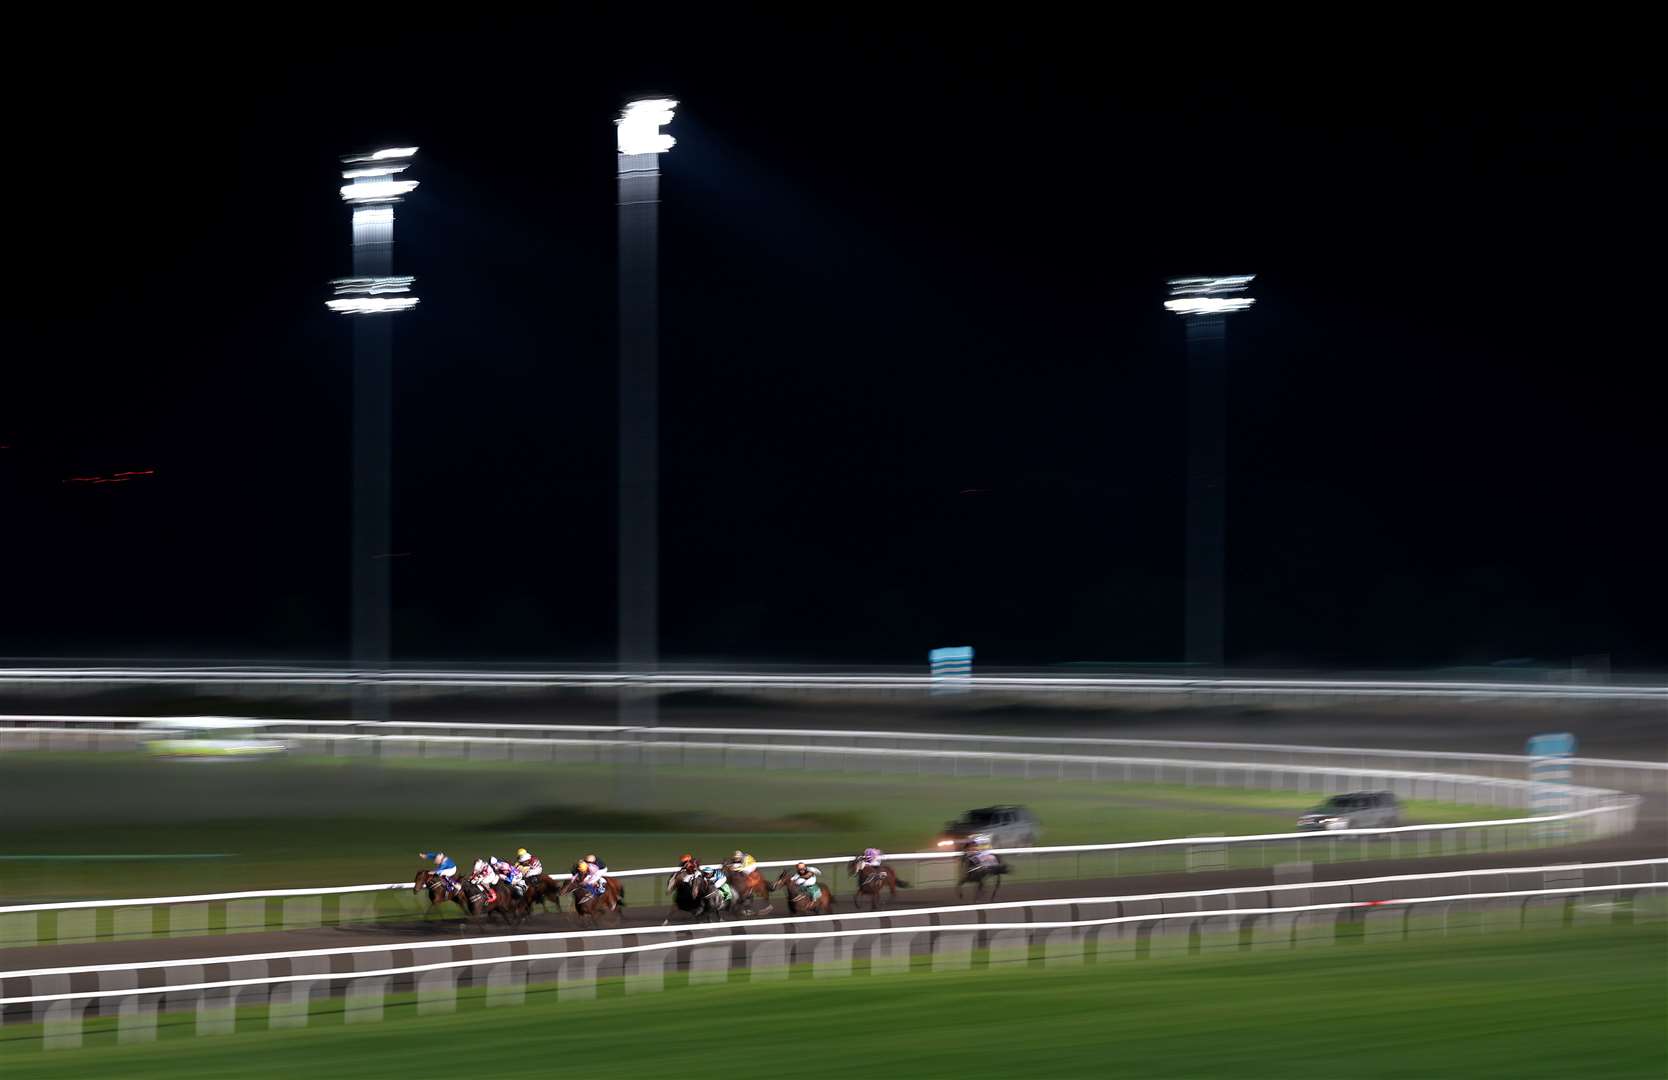 Runners in action on the all-weather at Kempton Park (John Walton/PA)